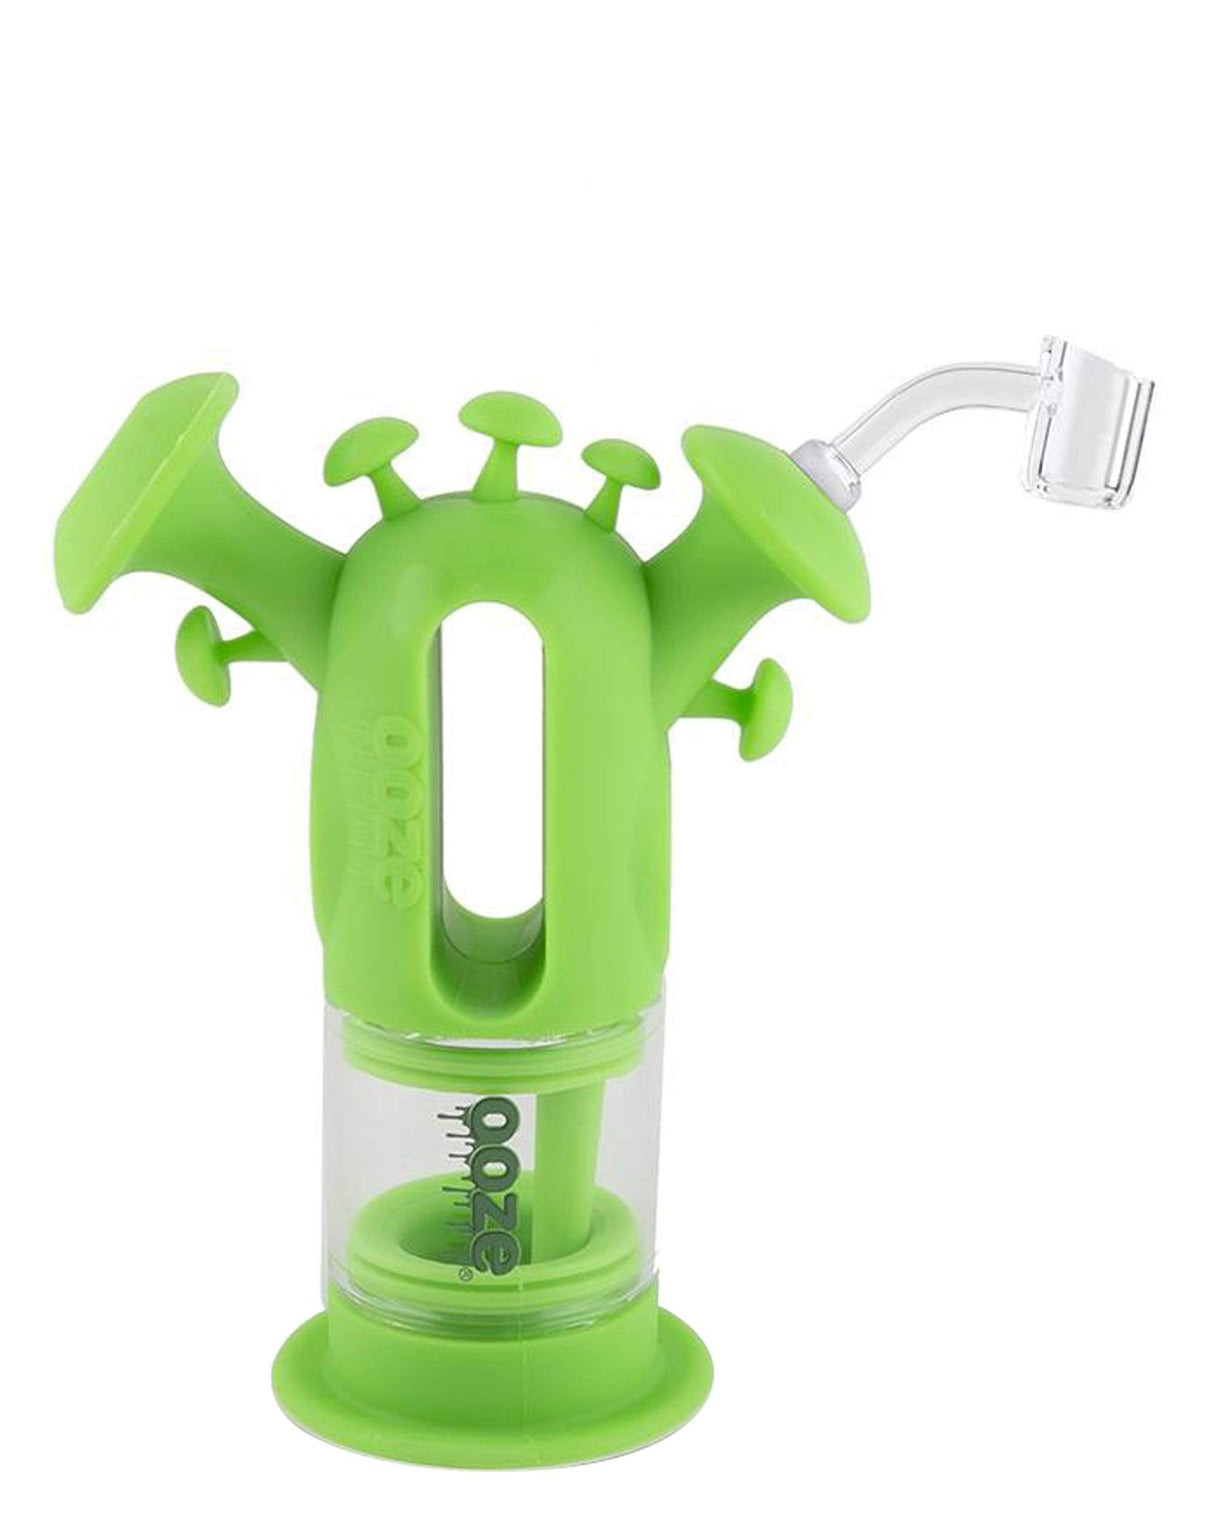 Ooze - Trip Silicone Bubbler in Green, Front View, 45 Degree Quartz Banger, For Dry Herbs & Concentrates